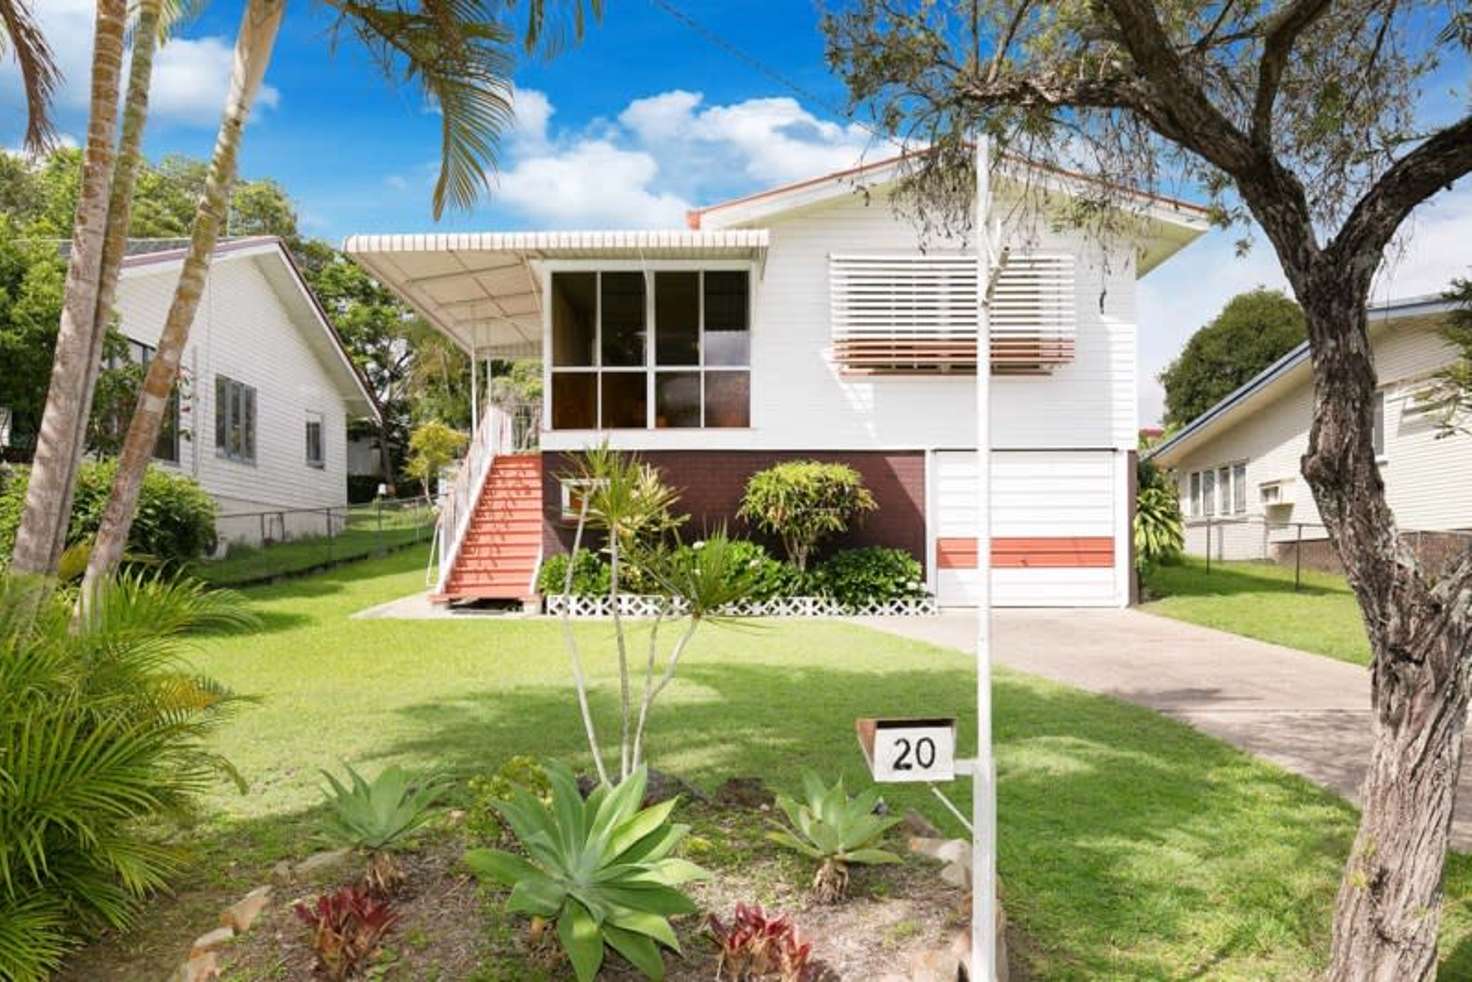 Main view of Homely house listing, 20 Bringelly Street, Arana Hills QLD 4054